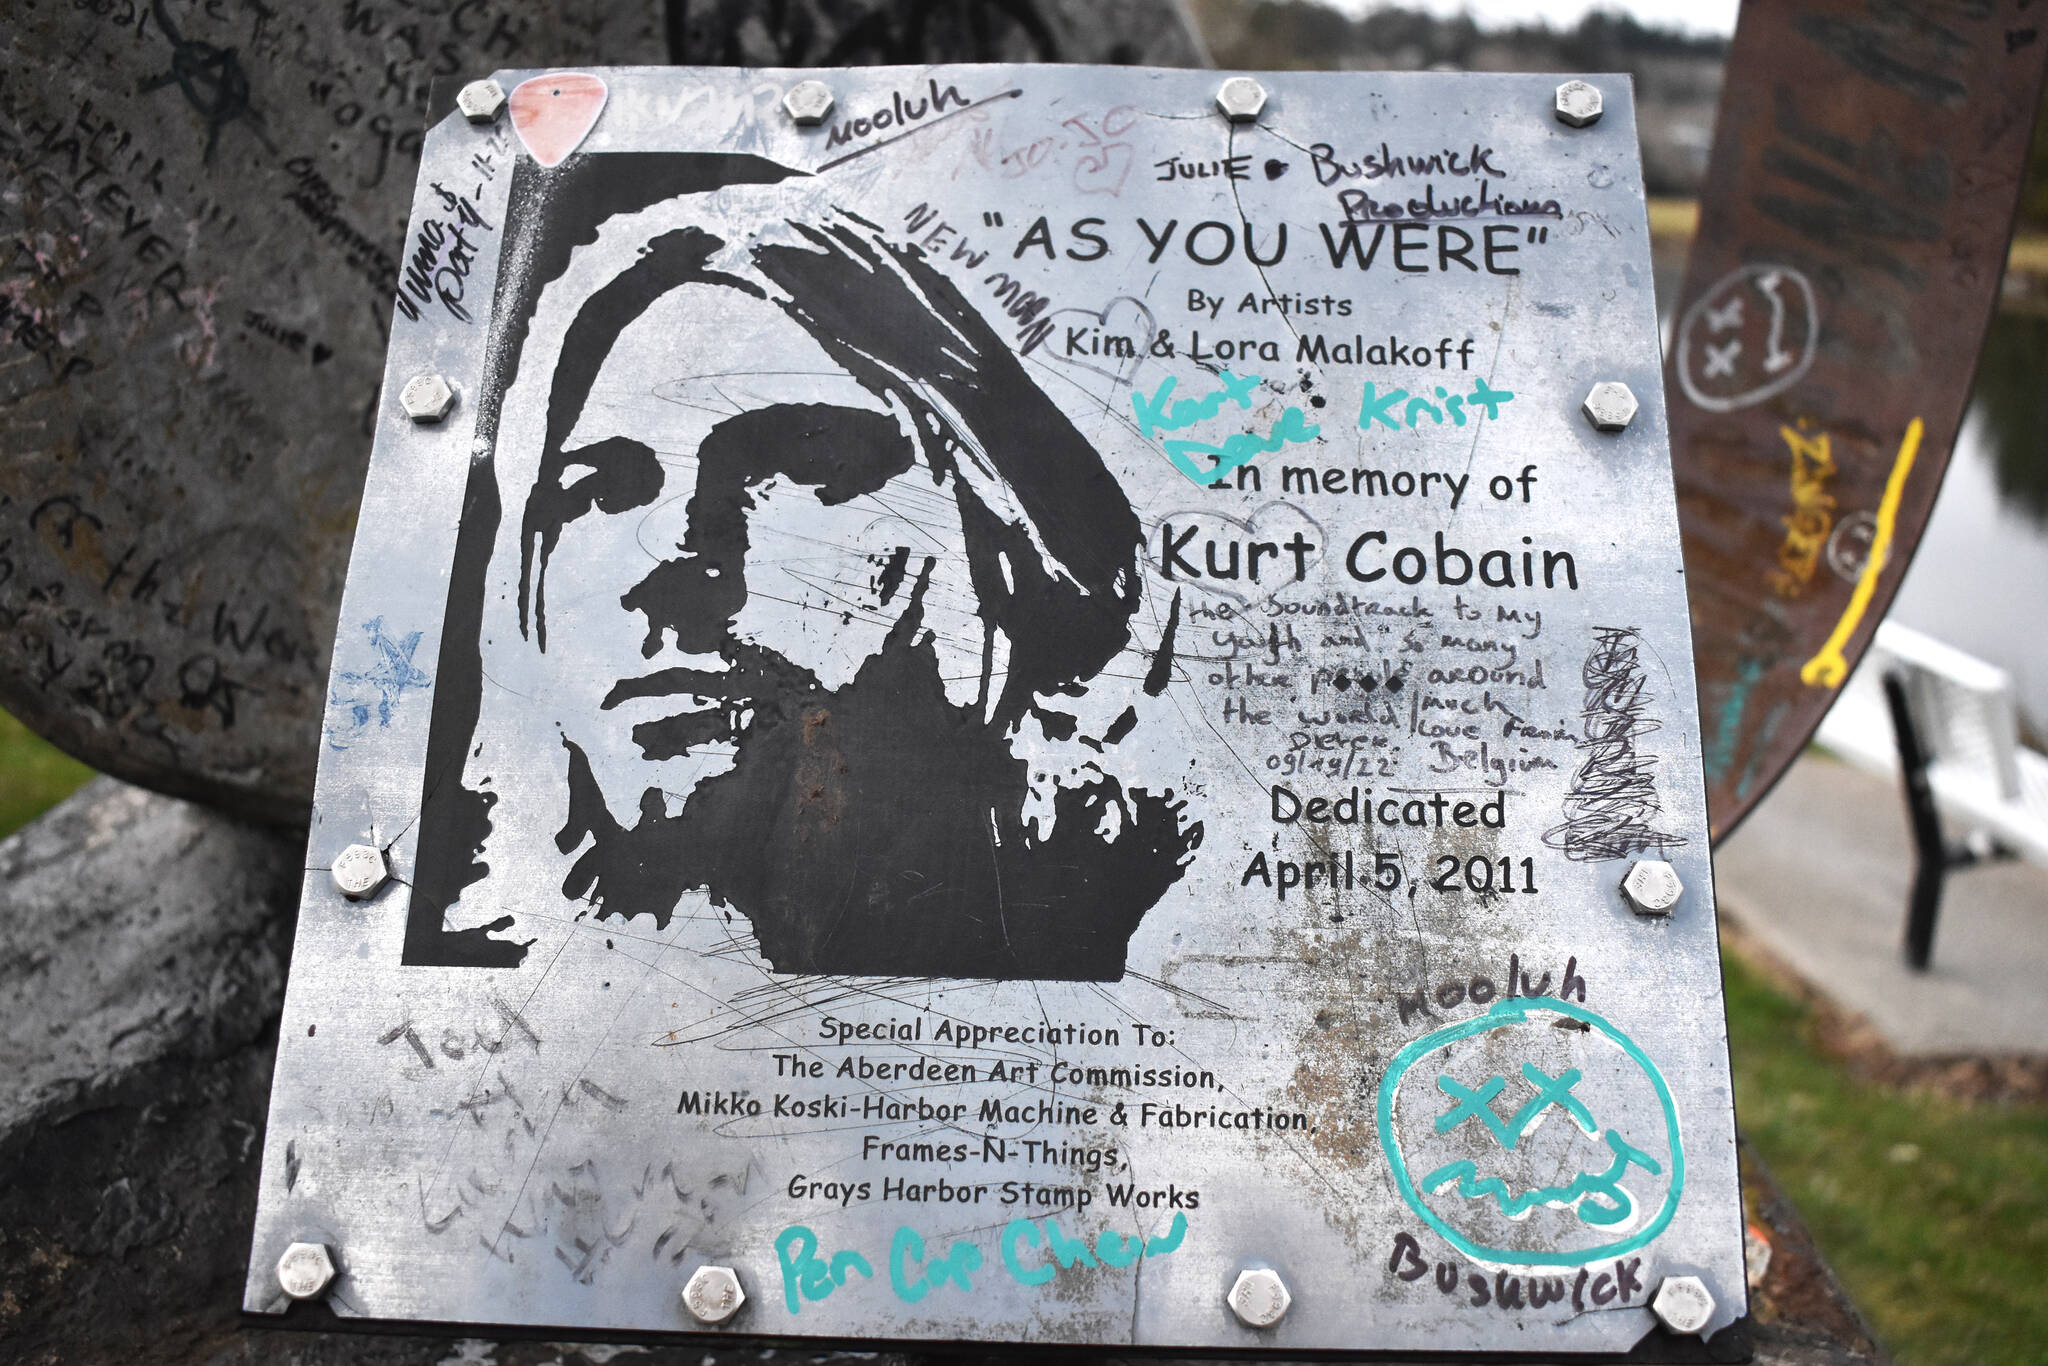 The plaque, which is posted on the guitar statue at Kurt Cobain Memorial Park shows the date the park was dedicated — April 5, 2011 — in North Aberdeen. The park sits at the base of the Young Street Bridge, which is slated to be replaced in the next few years. Recently, a local historian reached out to the city to air his concerns about the bridge and the park. (Matthew N. Wells / The Daily World)